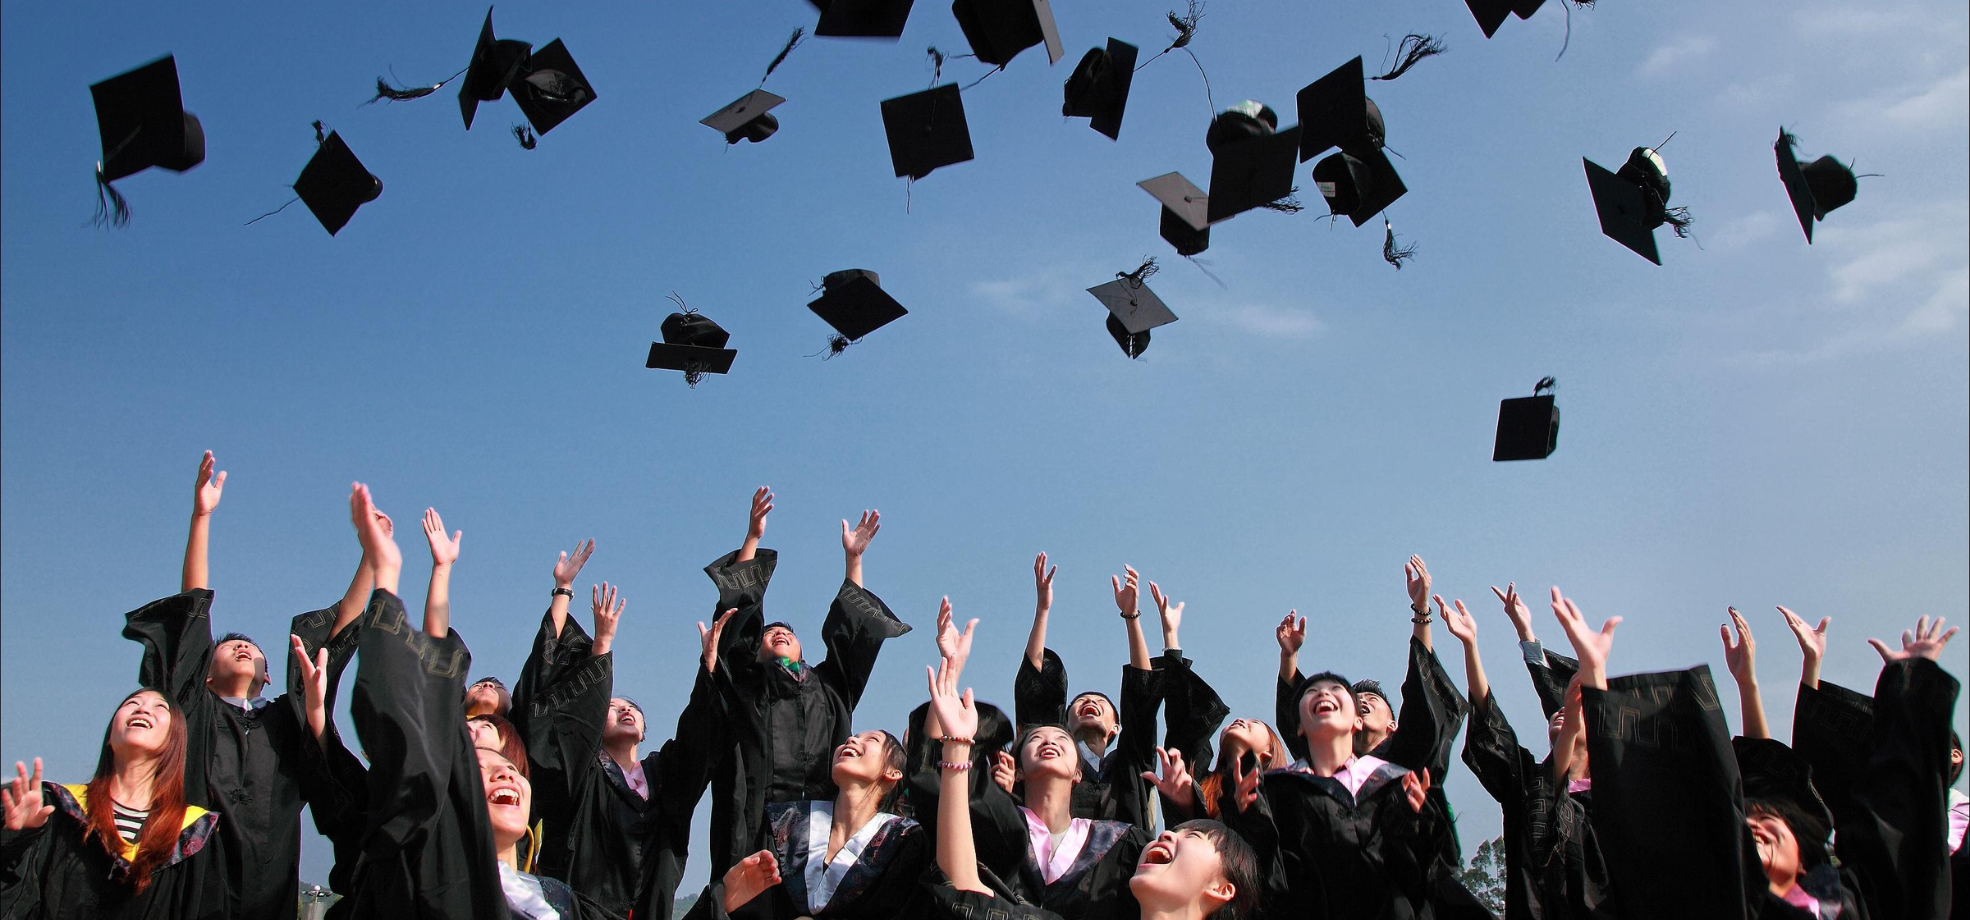 Image of graduates throwing their caps in the air.